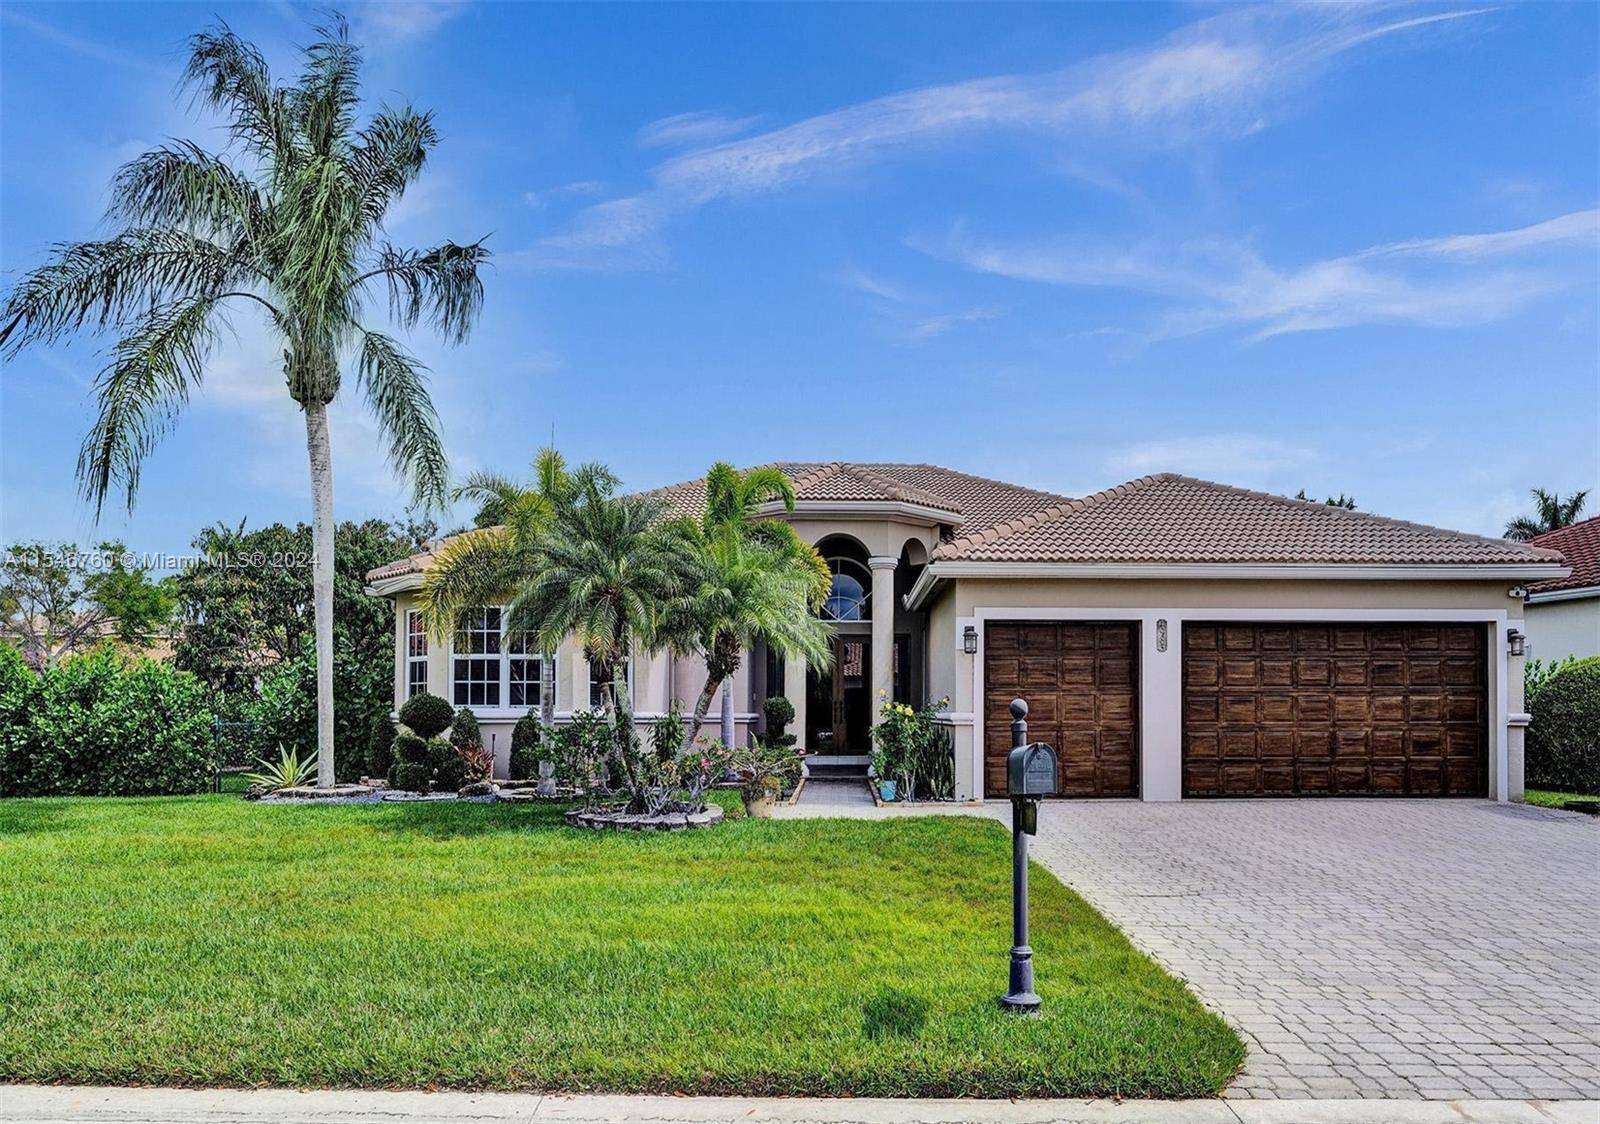 New Improved Price Breathtaking Rarely Available Single Story Corner Home with 5 Bedrooms, 3 ½ Baths, 3 Car Garage and a Screened Pool Oasis, in the Sought After Gated Community ...